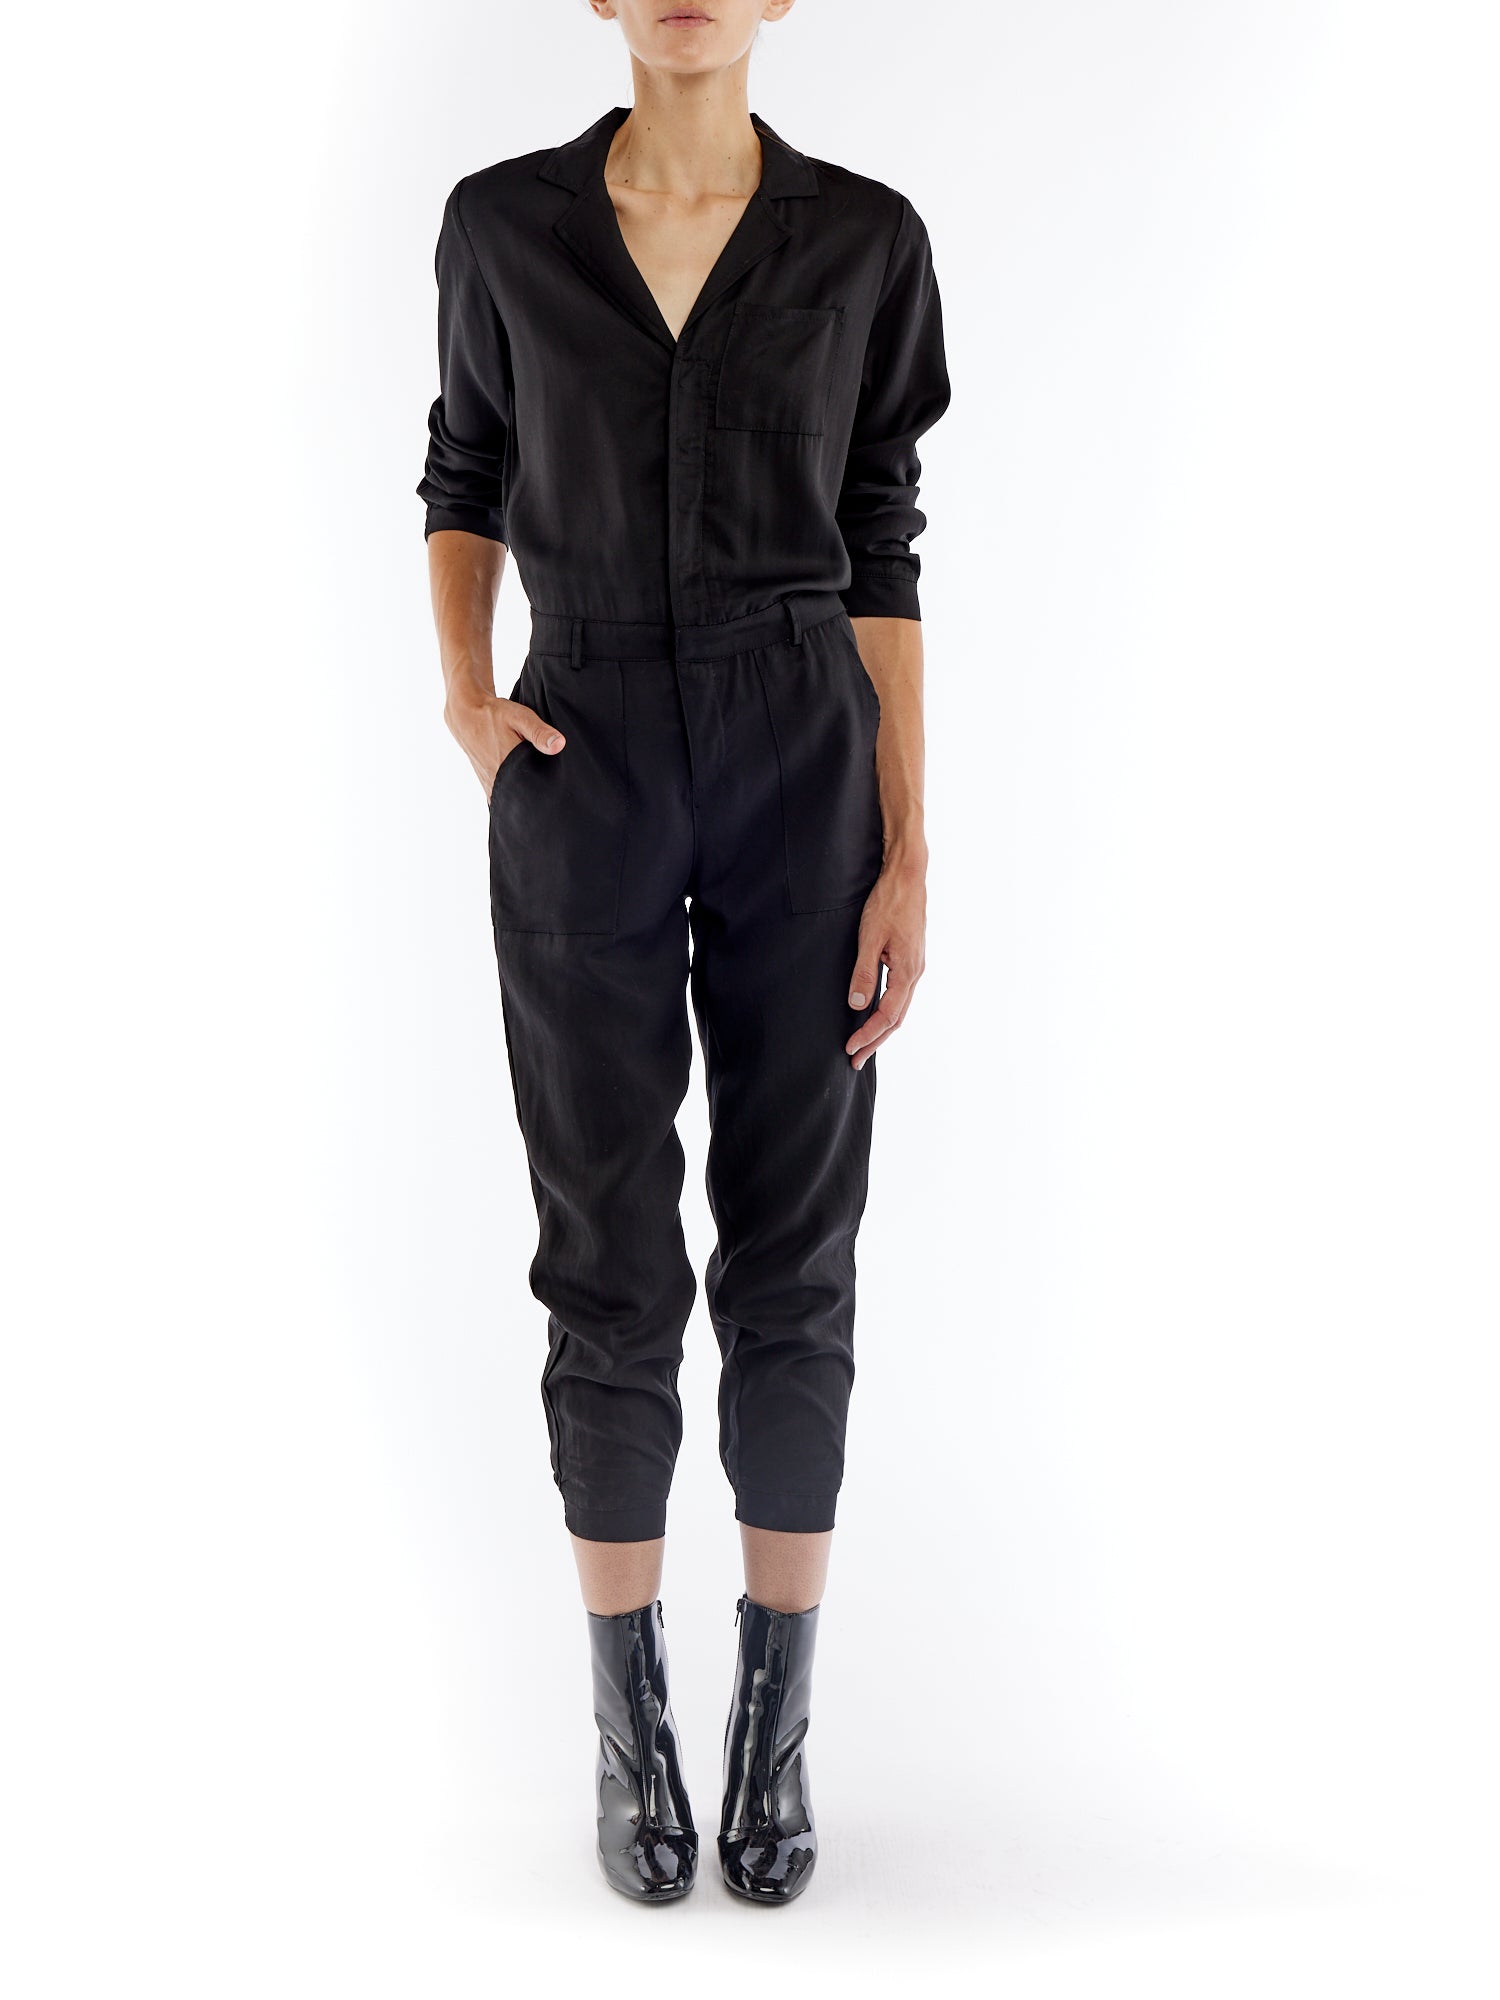 jumpsuit featuring a collared, button-front, long, cuffed sleeves, elasticized waist and bottom cuffs in black